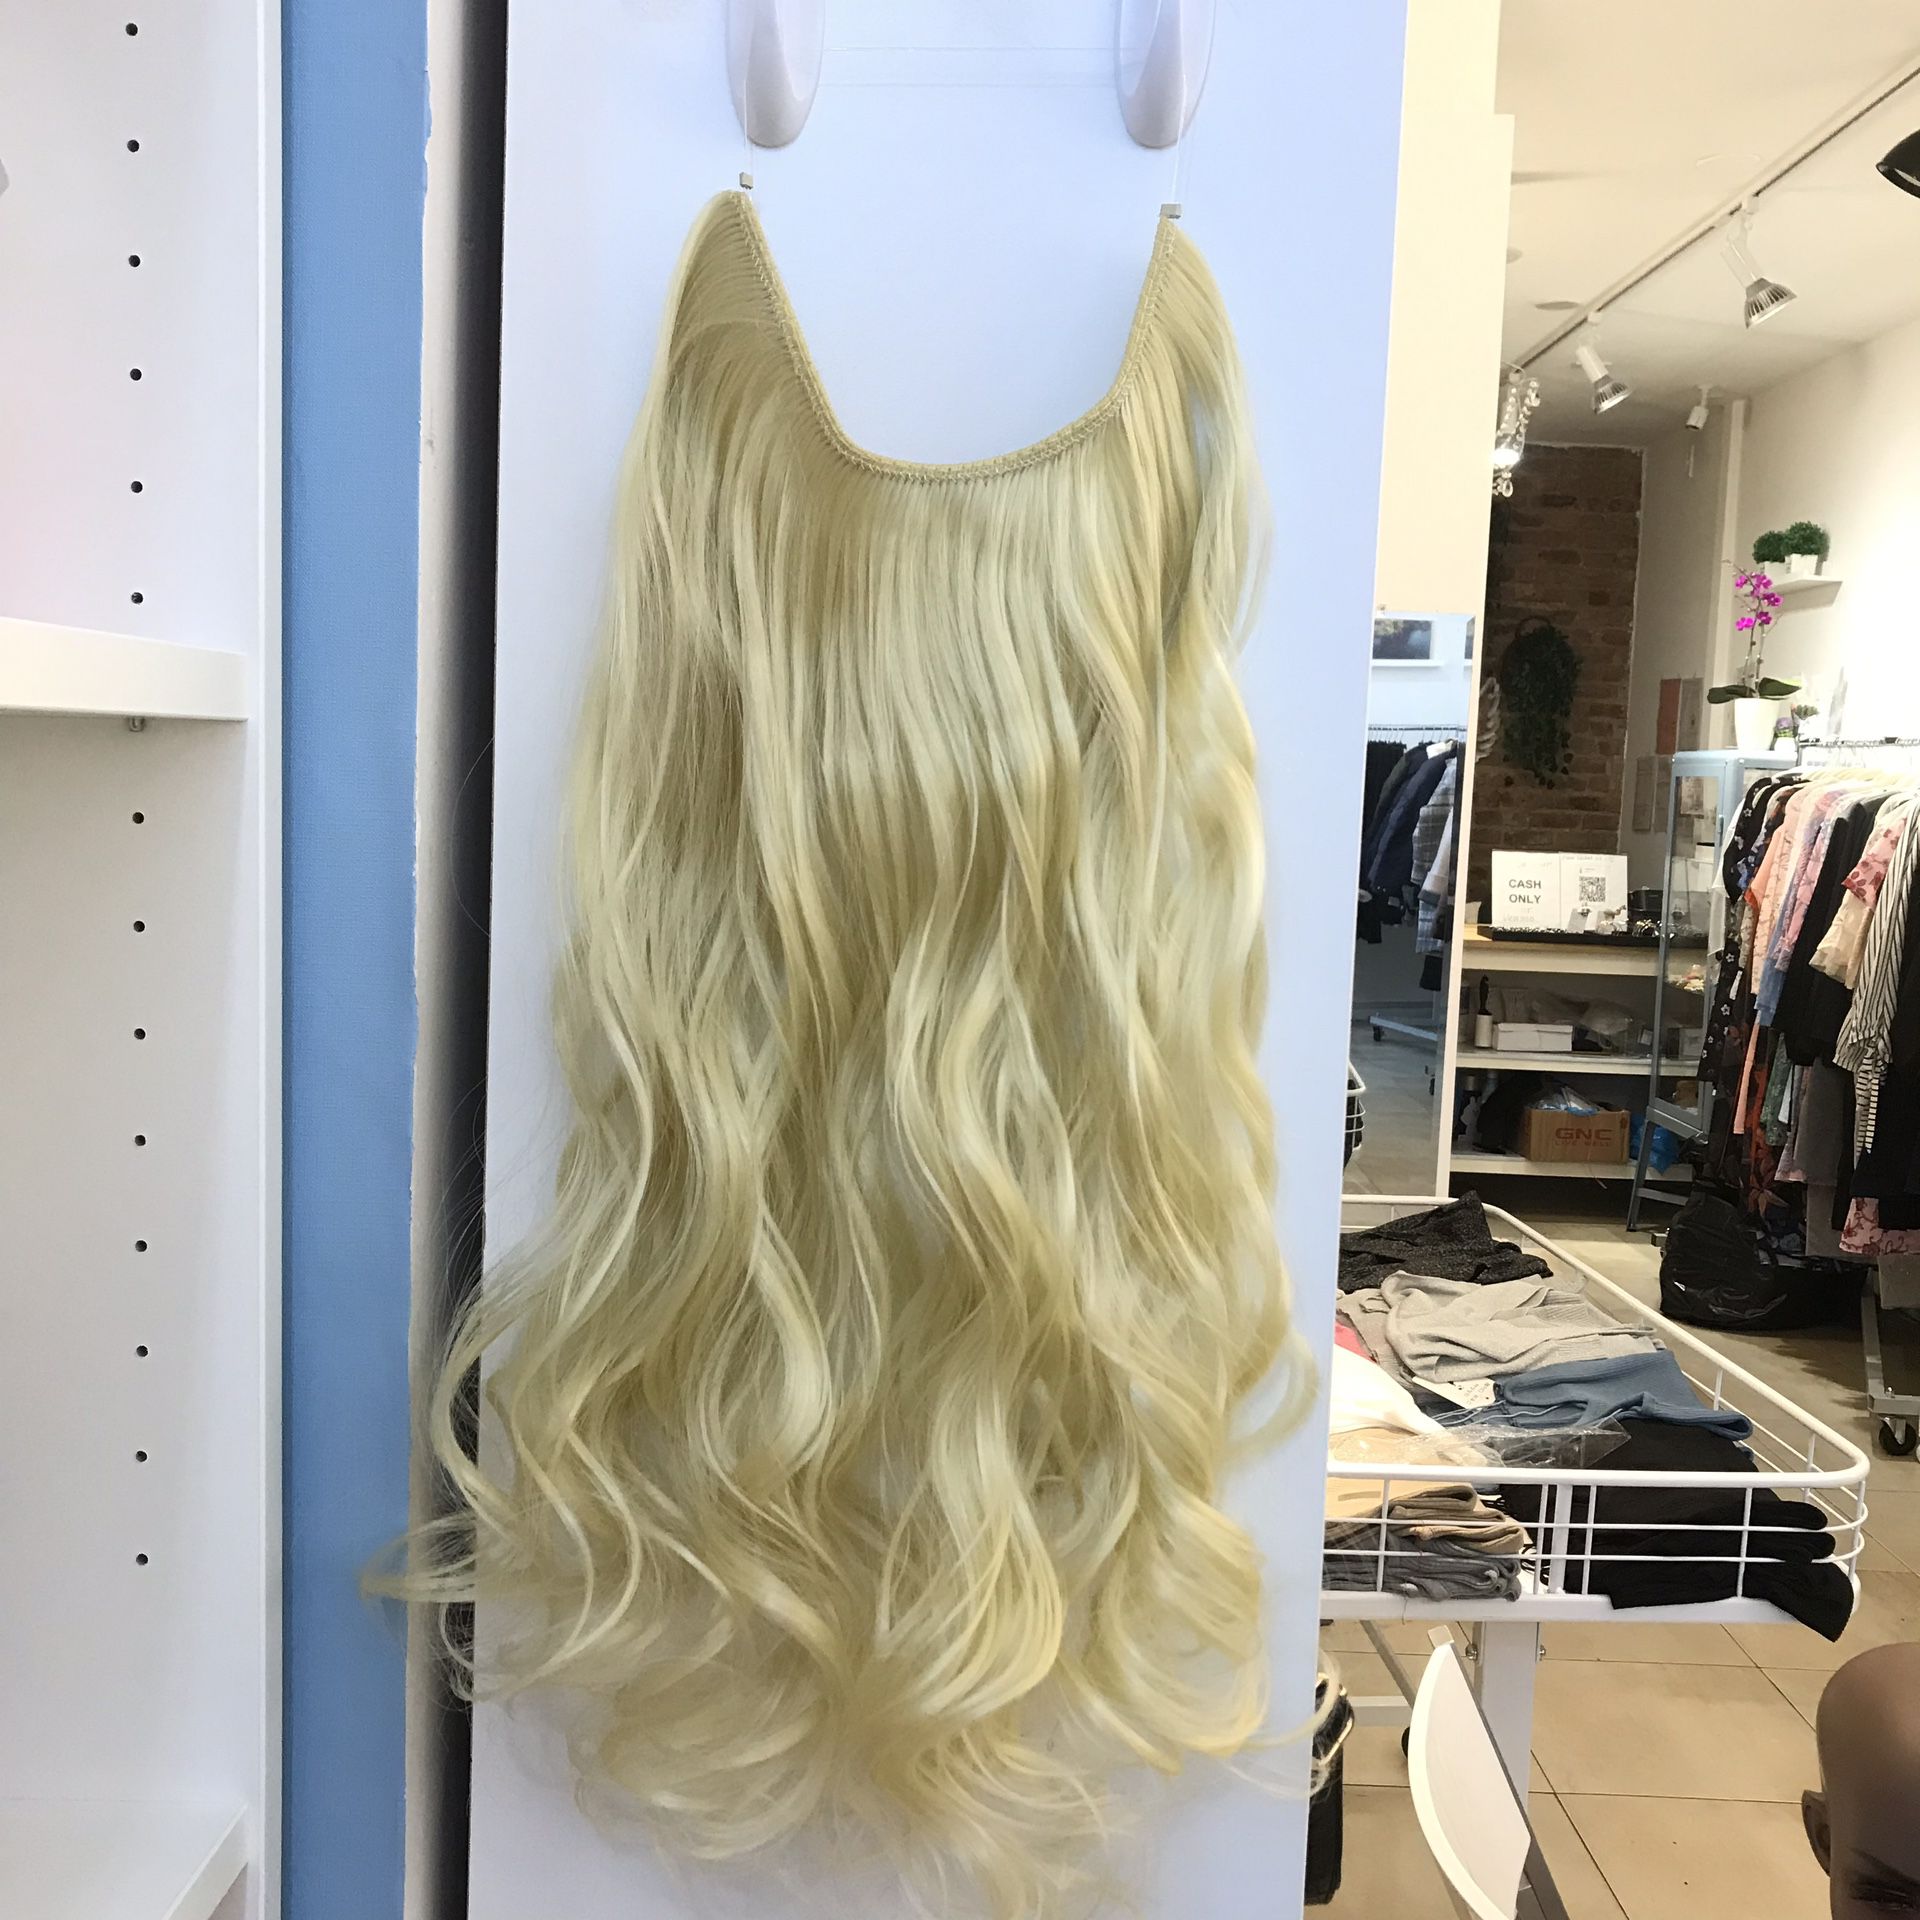 24” Fish line band halo hair extensions